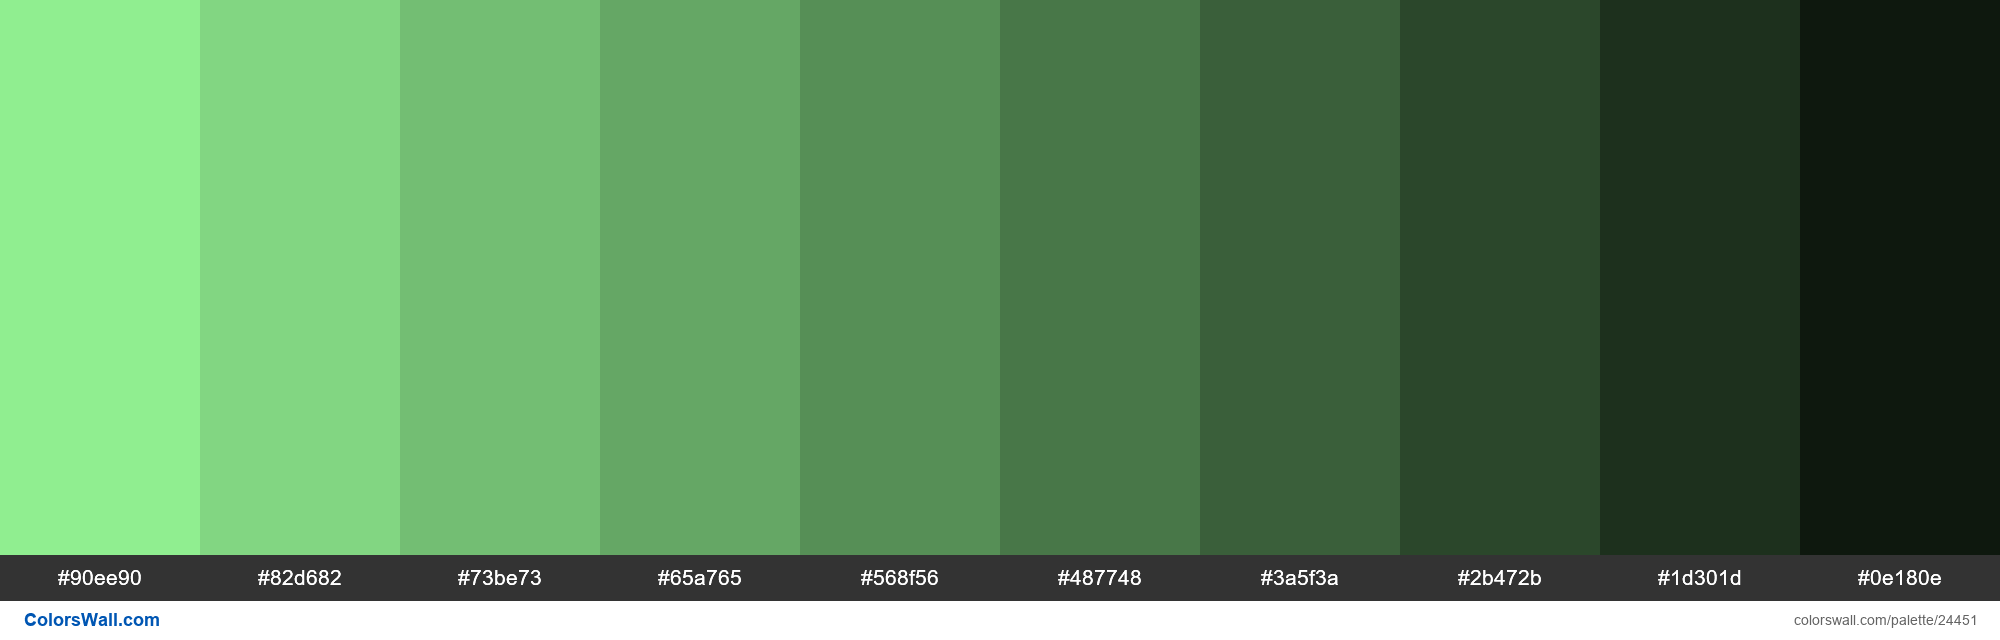 colorswall on X: Shades of Light Green #90EE90 hex color #90ee90, #82d682,  #73be73, #65a765, #568f56, #487748, #3a5f3a, #2b472b, #1d301d, #0e180e  #colors #palette   / X